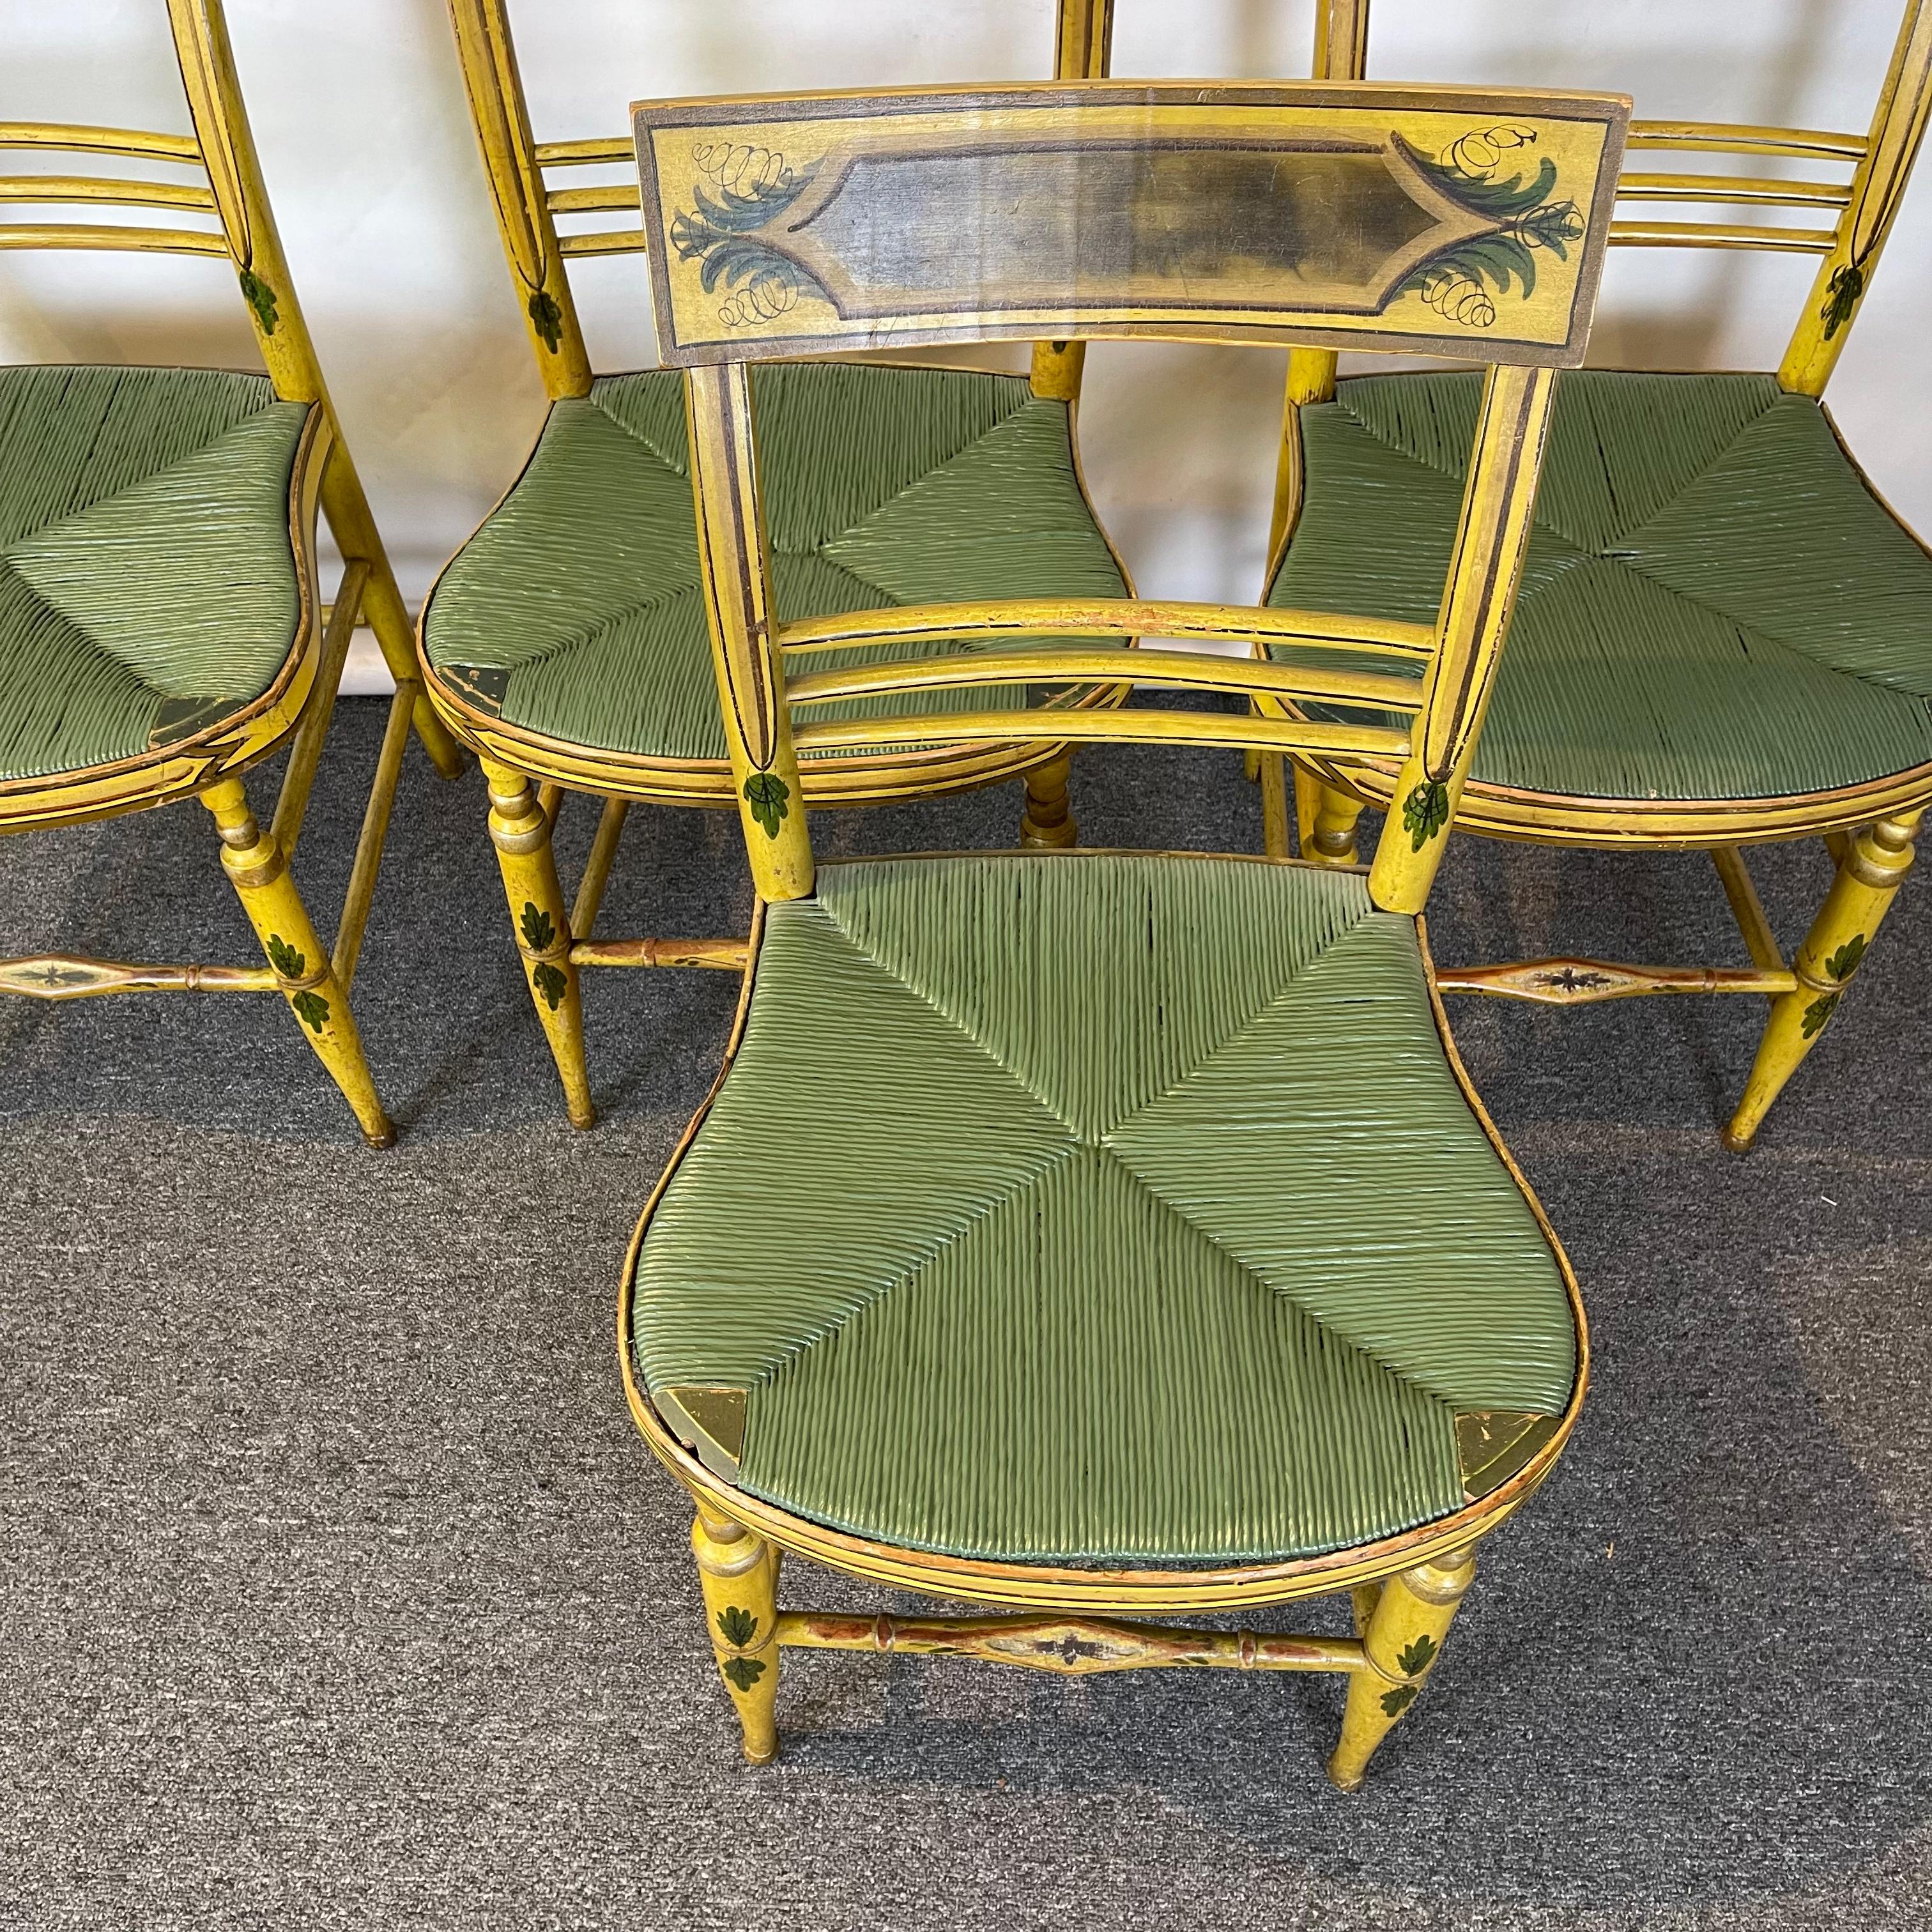 Mid-19th Century Set of Four Early 19th Century American Paint Decorated Fancy Chairs